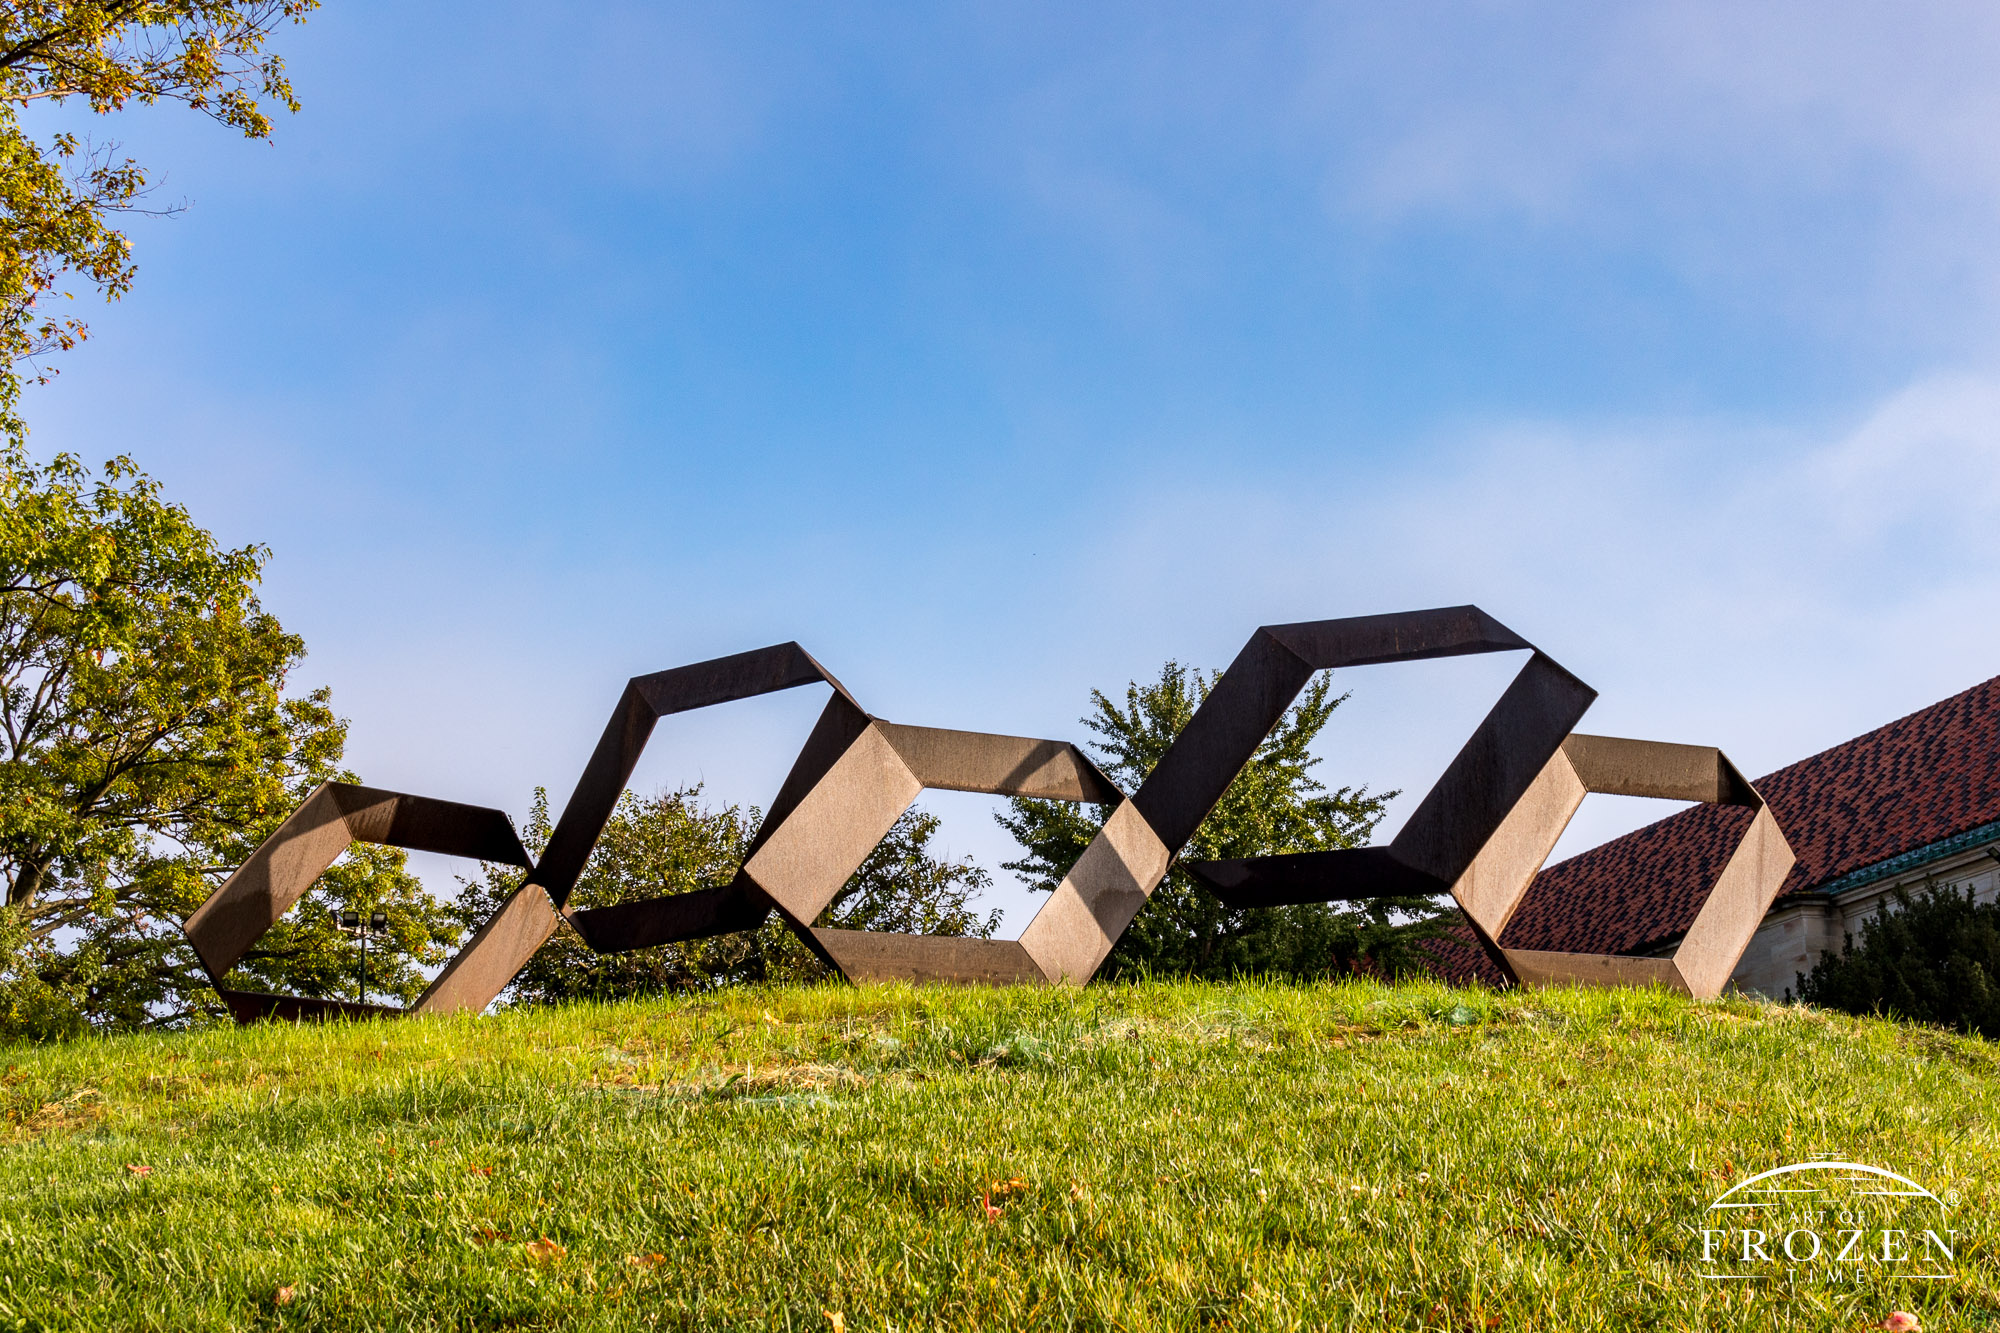 A sculpture resides on a small knoll consisting of abstract Olympic Rings in quadrilateral form while basking in the morning sun